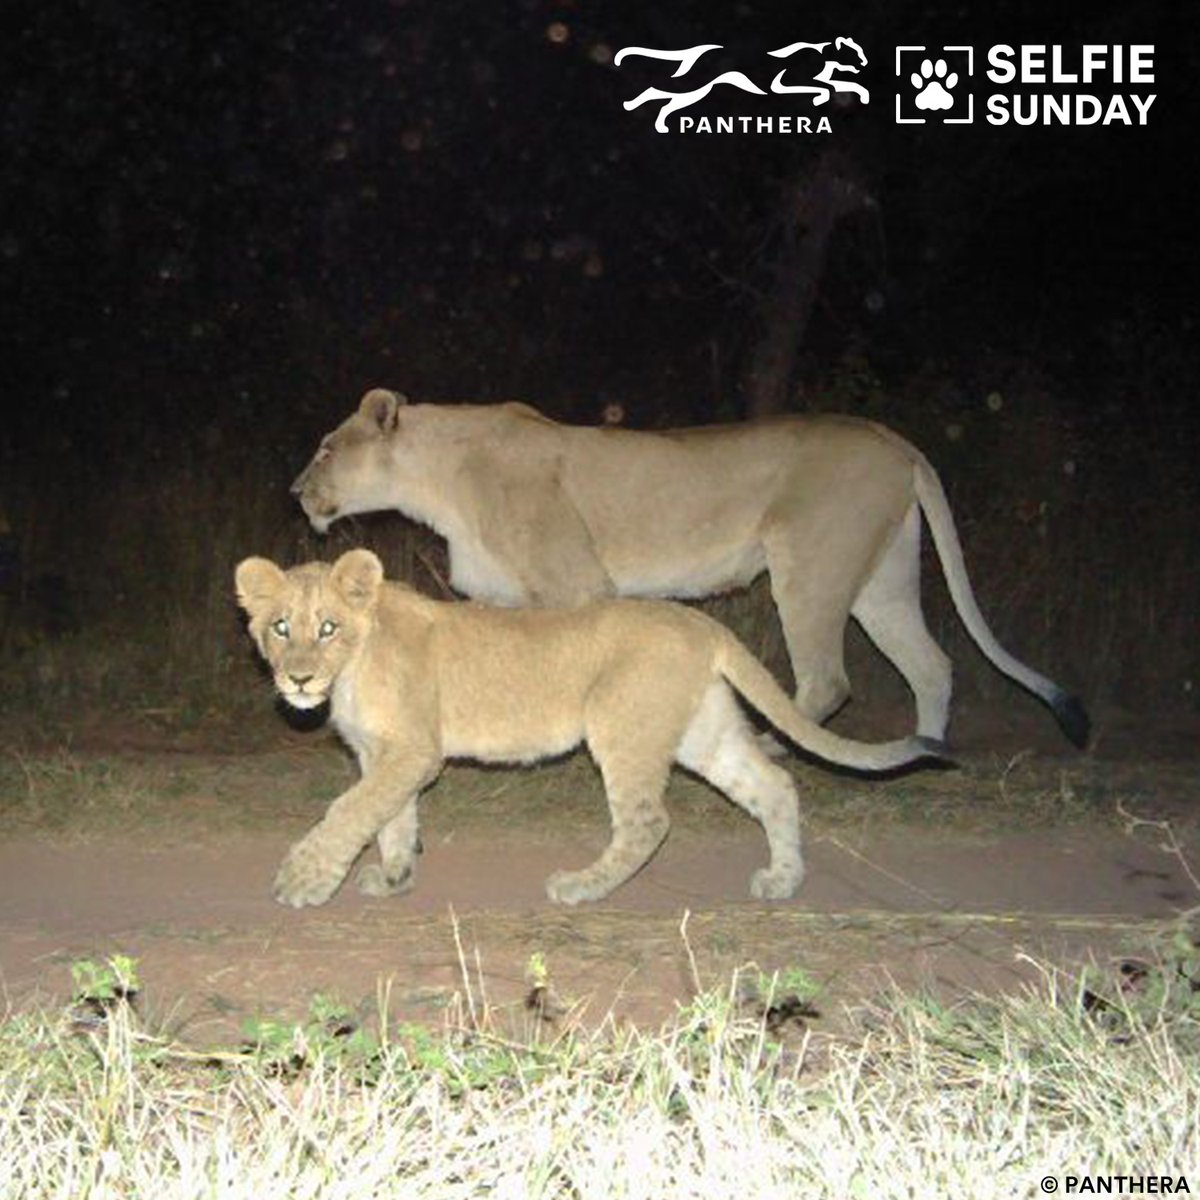 For this young lion, a remote camera is something worth posing for — even as mom nonchalantly walks on. But curiosity is helping the cat — remote camera surveys help save lives. Learn more about our PantheraCams: bit.ly/3AW79cC